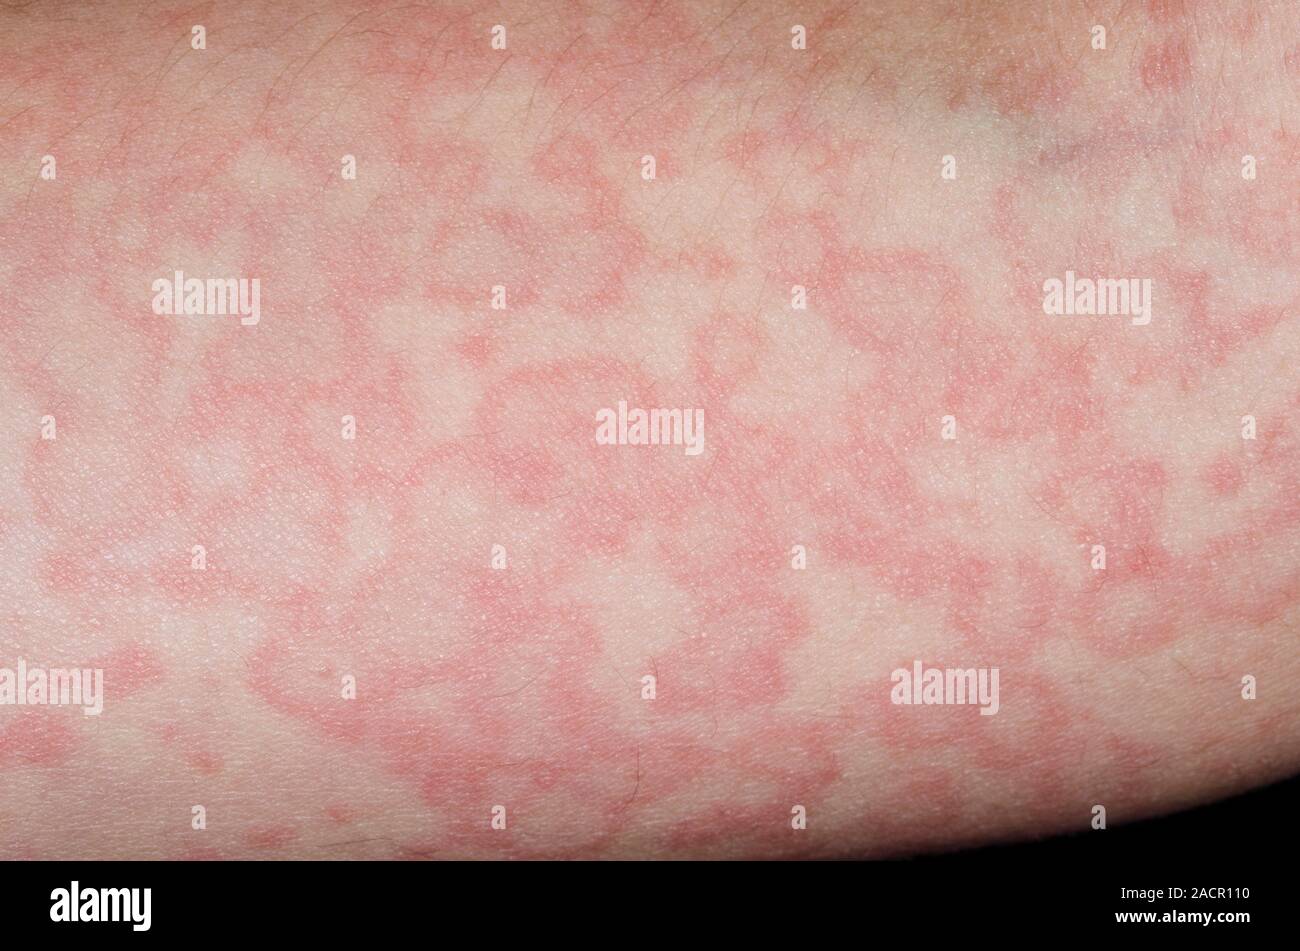 Rash of red wheals on the skin of an 11 year old male patient, an urticarial reaction to the viral infection slapped cheek disease. Urticaria (hives o Stock Photo